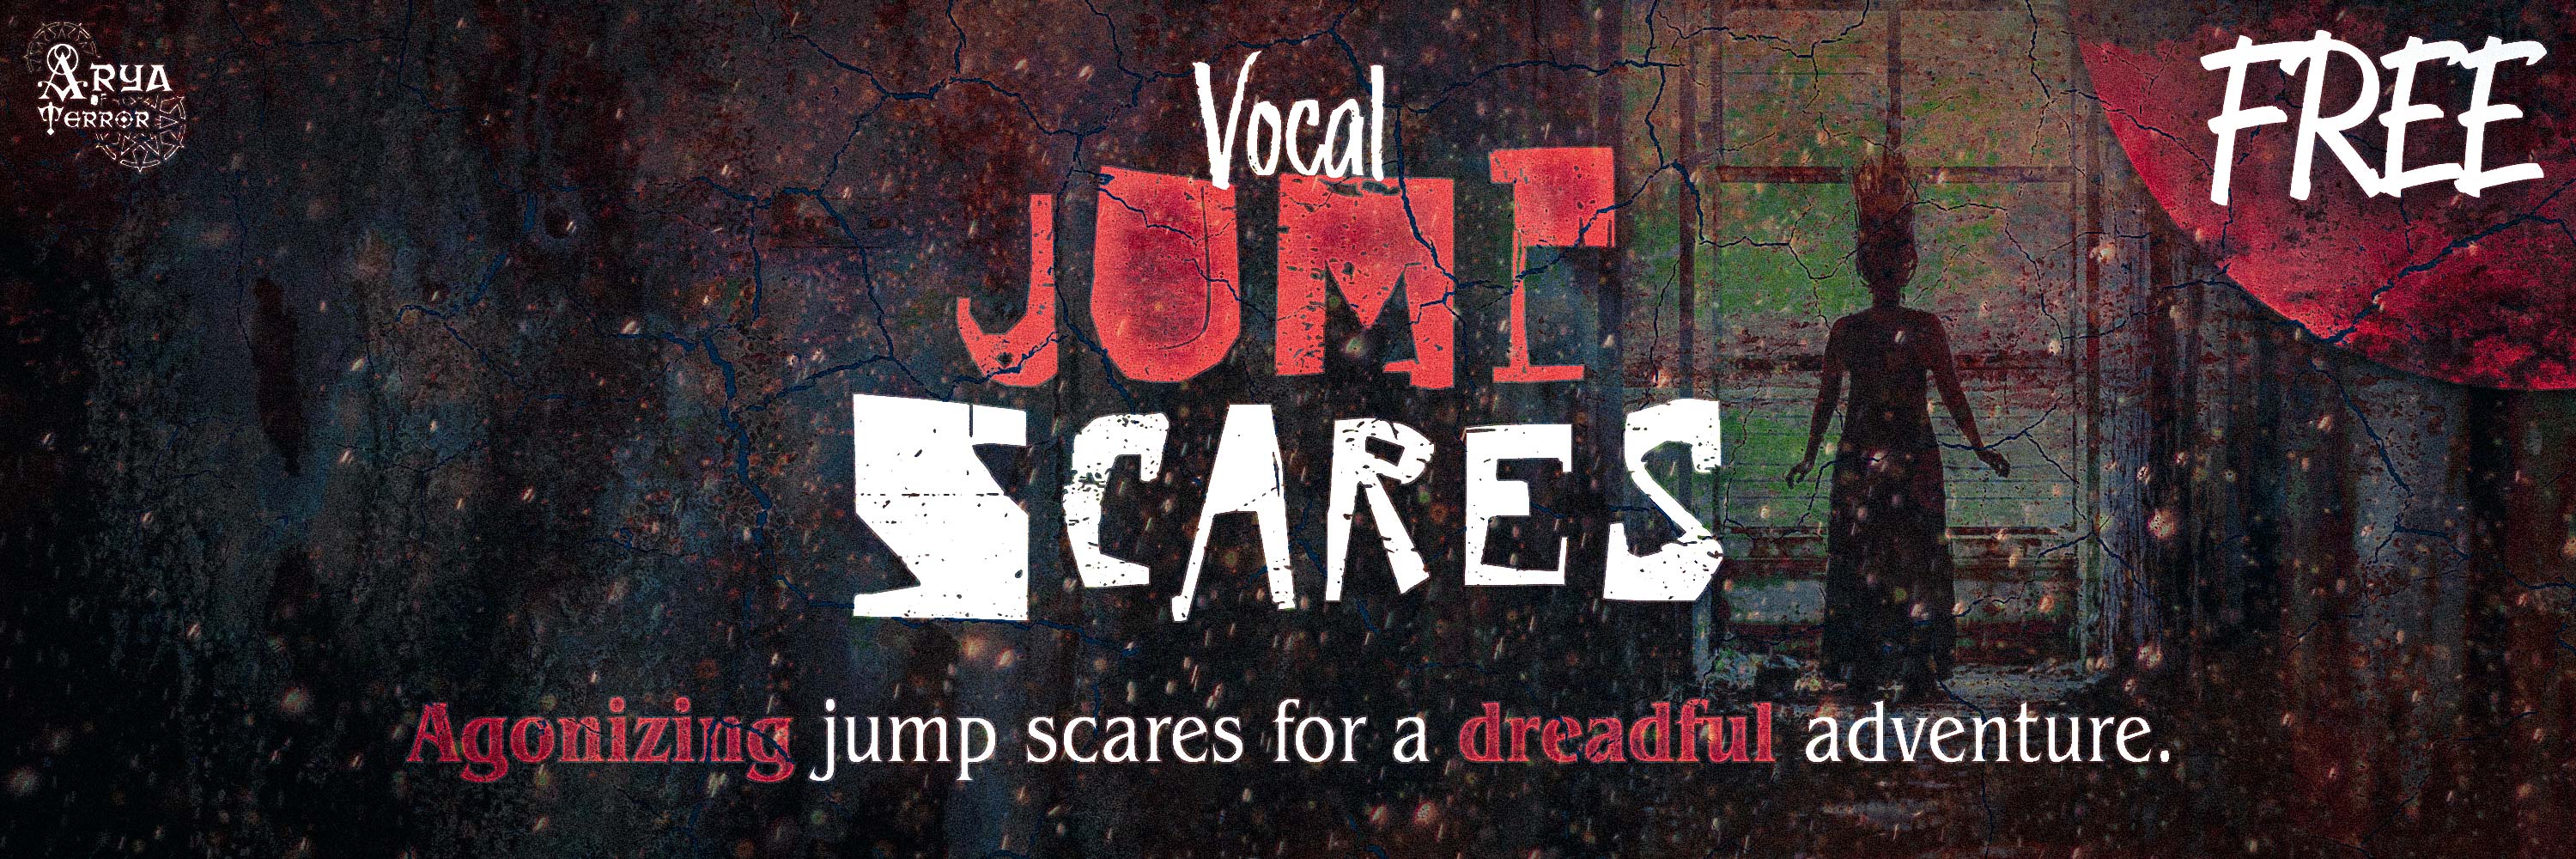 FREE Vocal Jump Scares